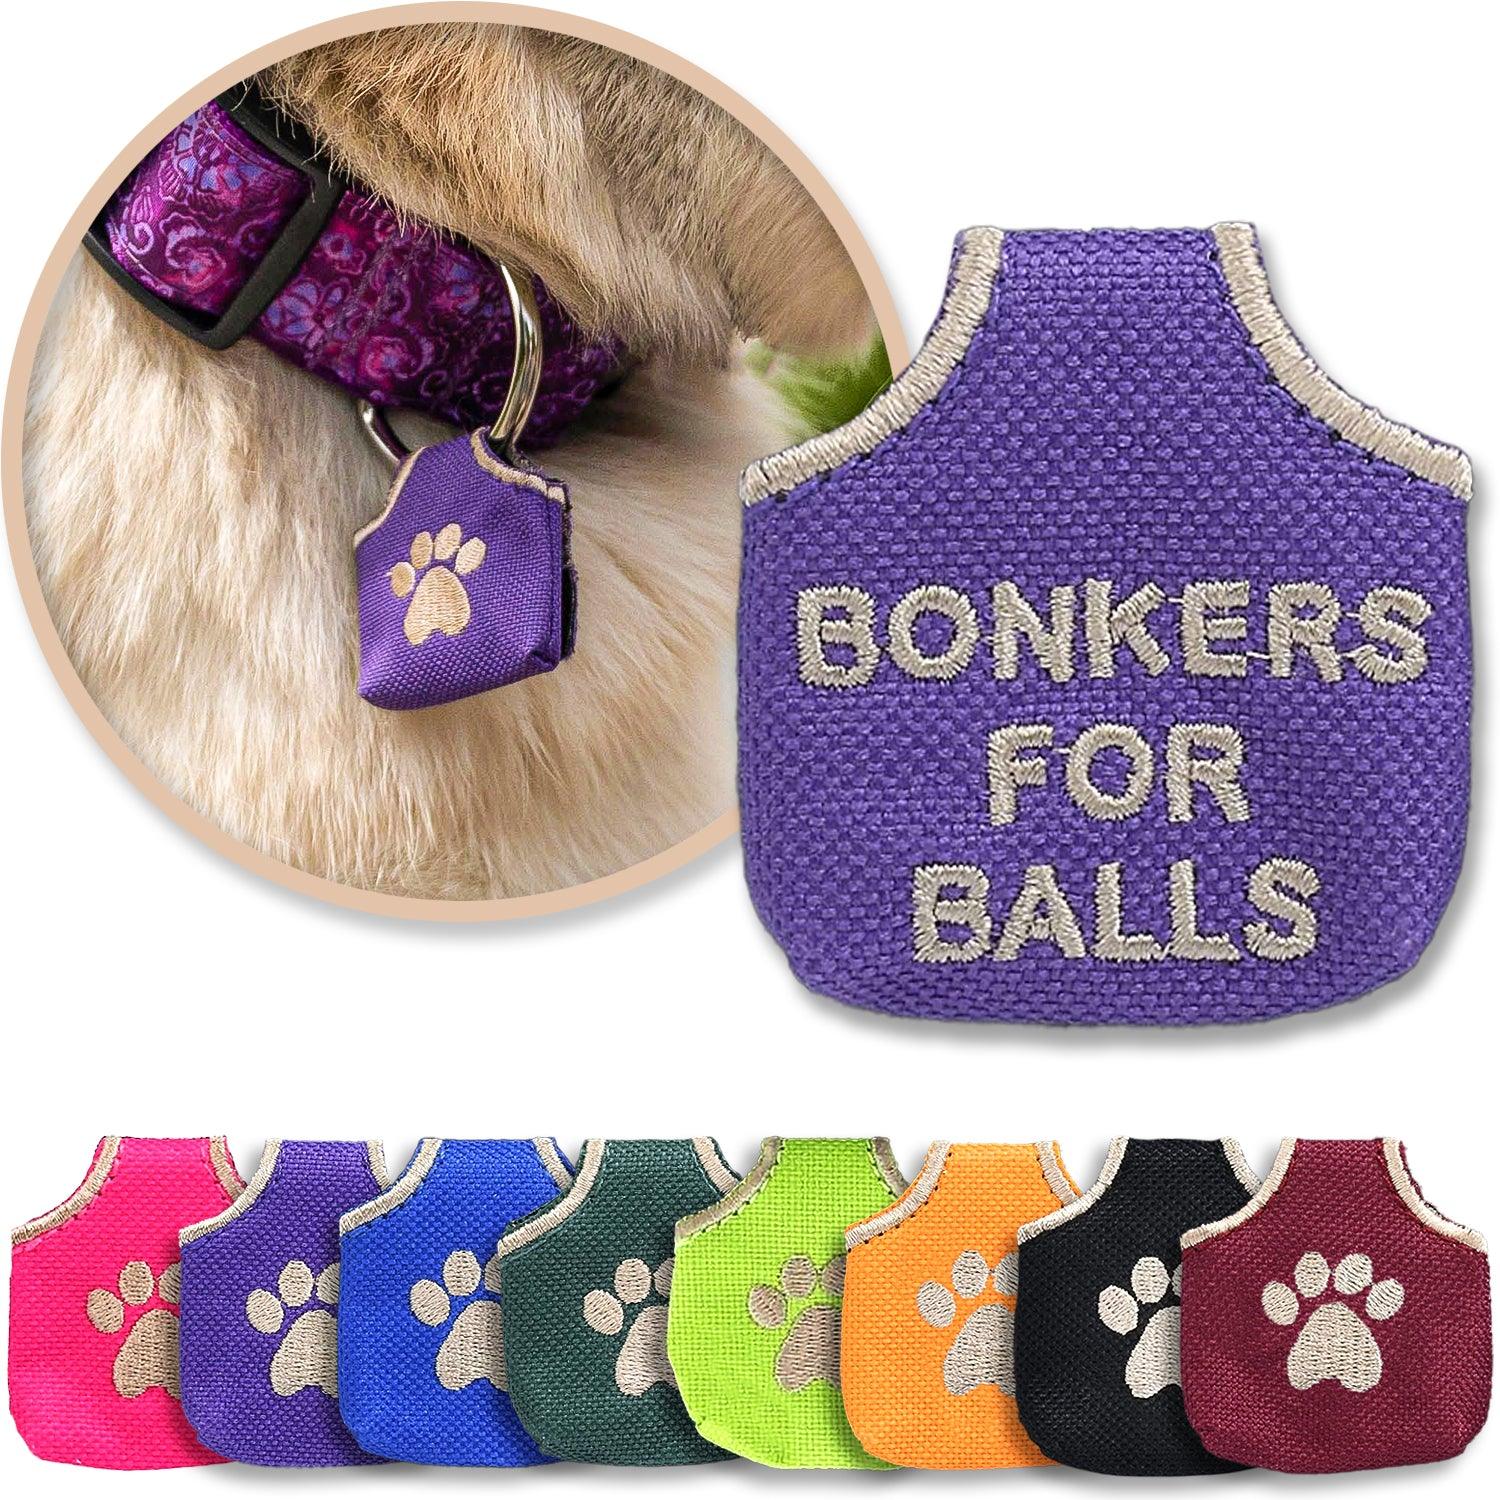 Purple 'Bonkers for Balls' pet tag silencer shown with other color options